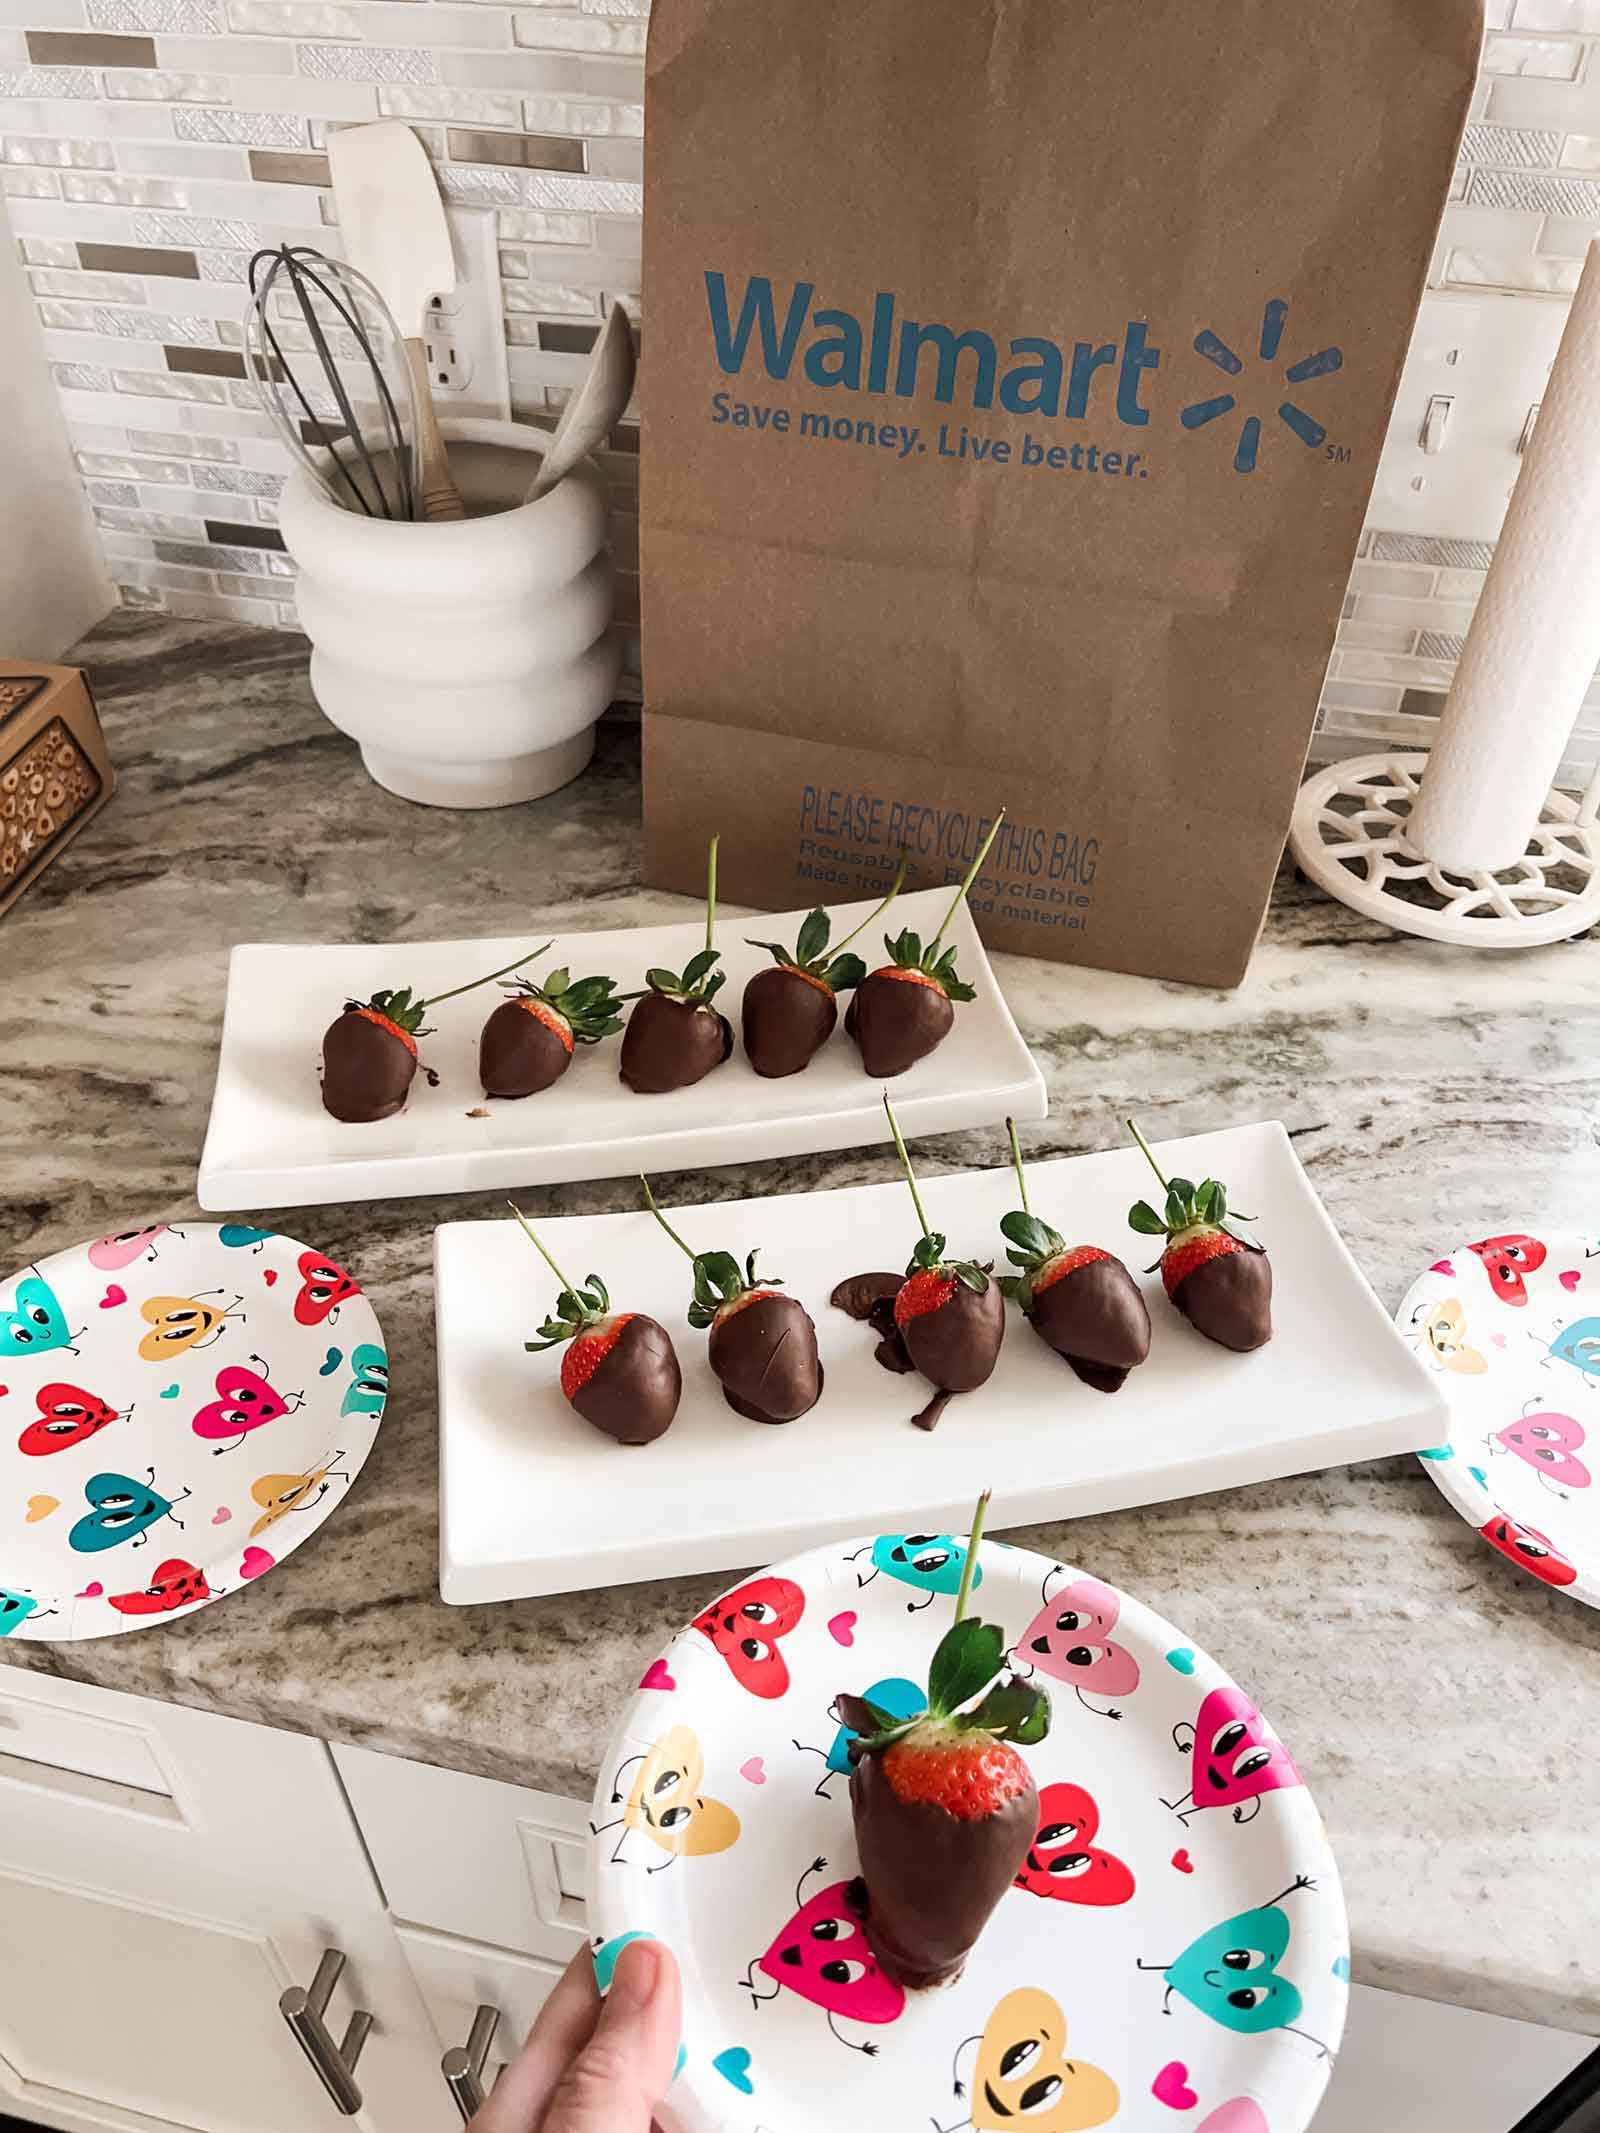 Easy dairy free chocolate covered strawberries recipe (tastes better than store bought!)